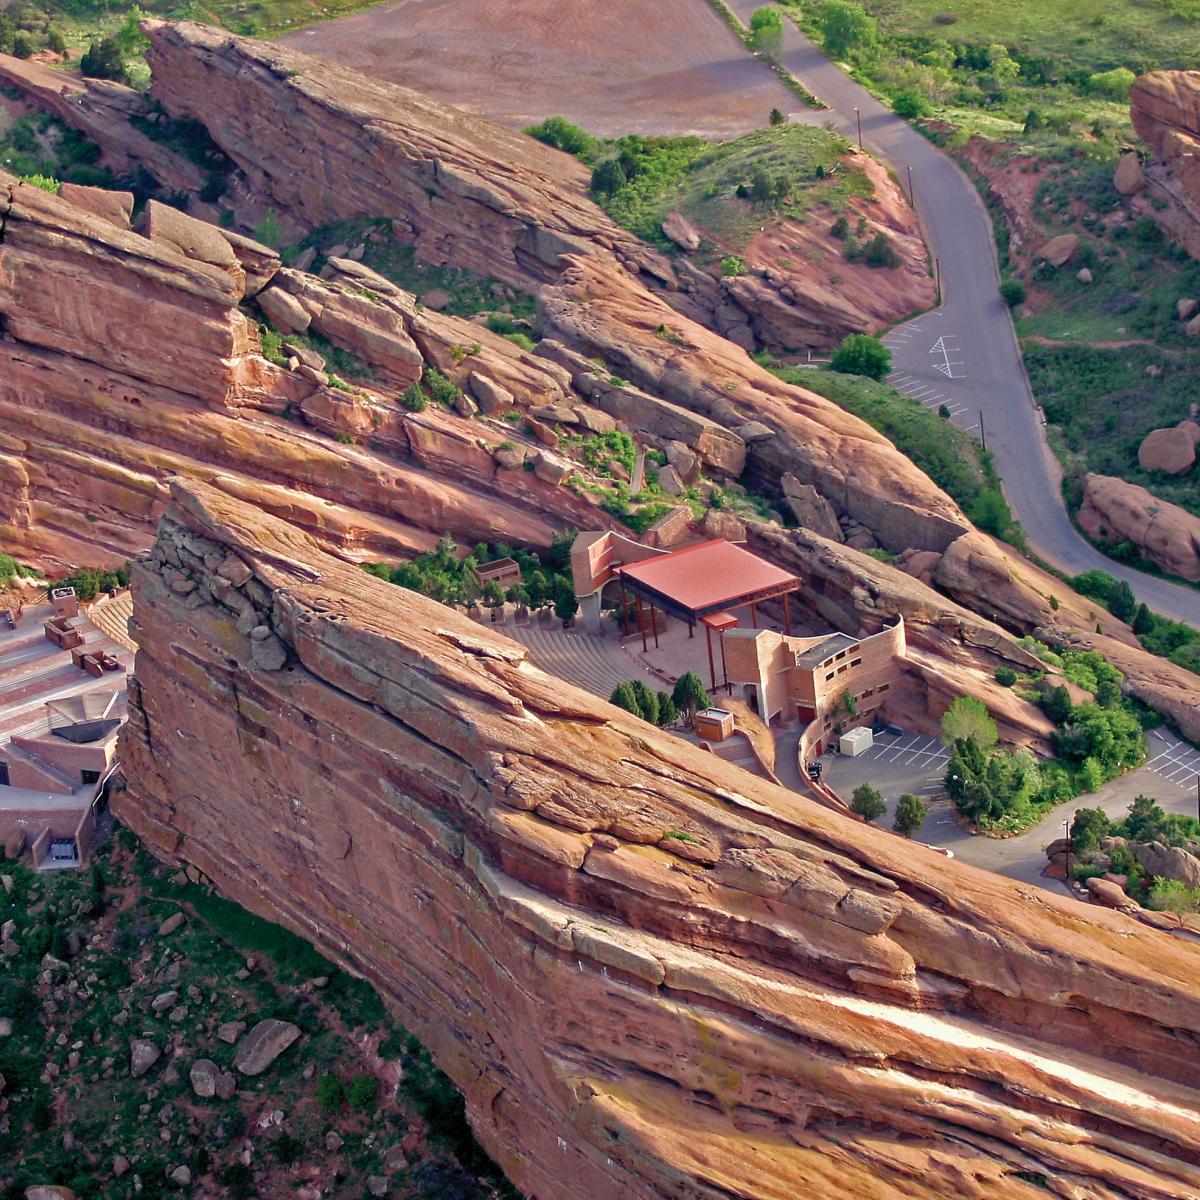 Aerial view of Red Rocks Park & Amphitheater